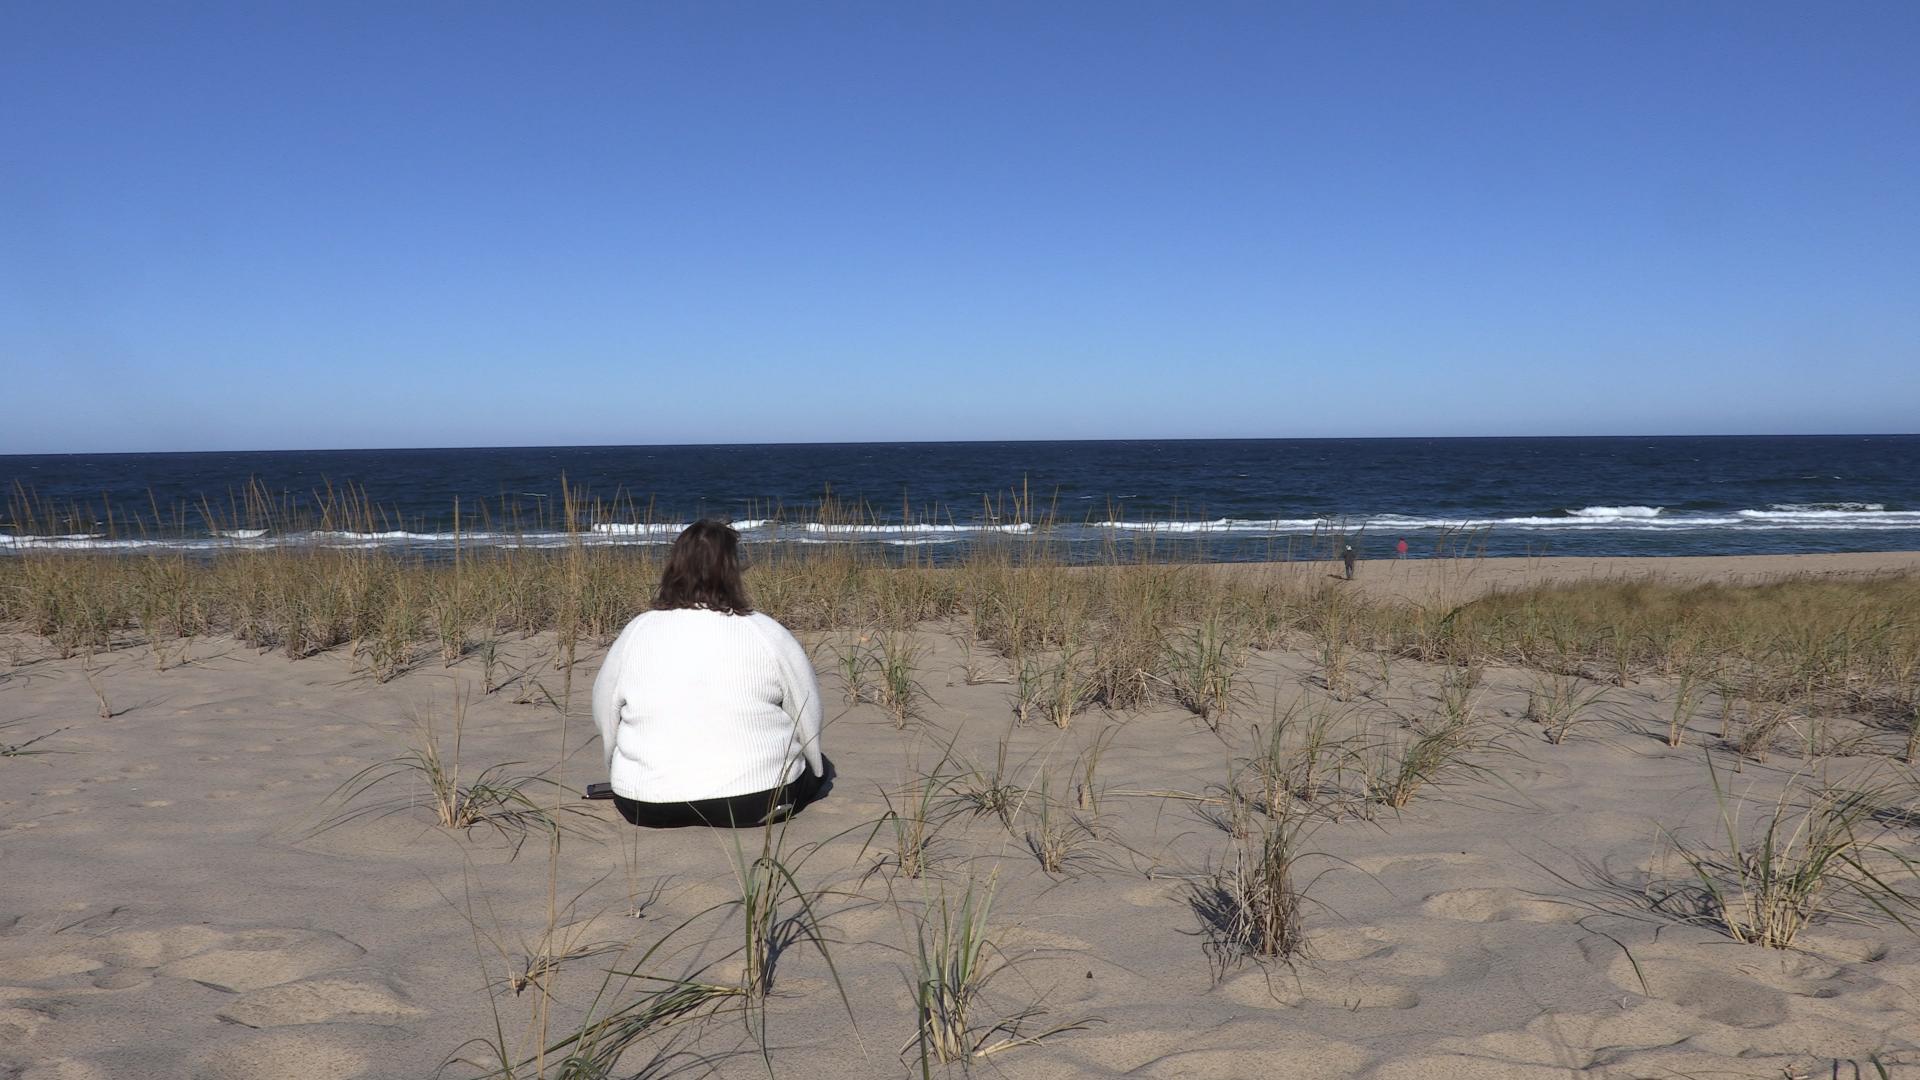 A middle aged woman sitting on a sandy beach with her back to the camera on a sunny day. She appears to be looking at the ocean in front of her.